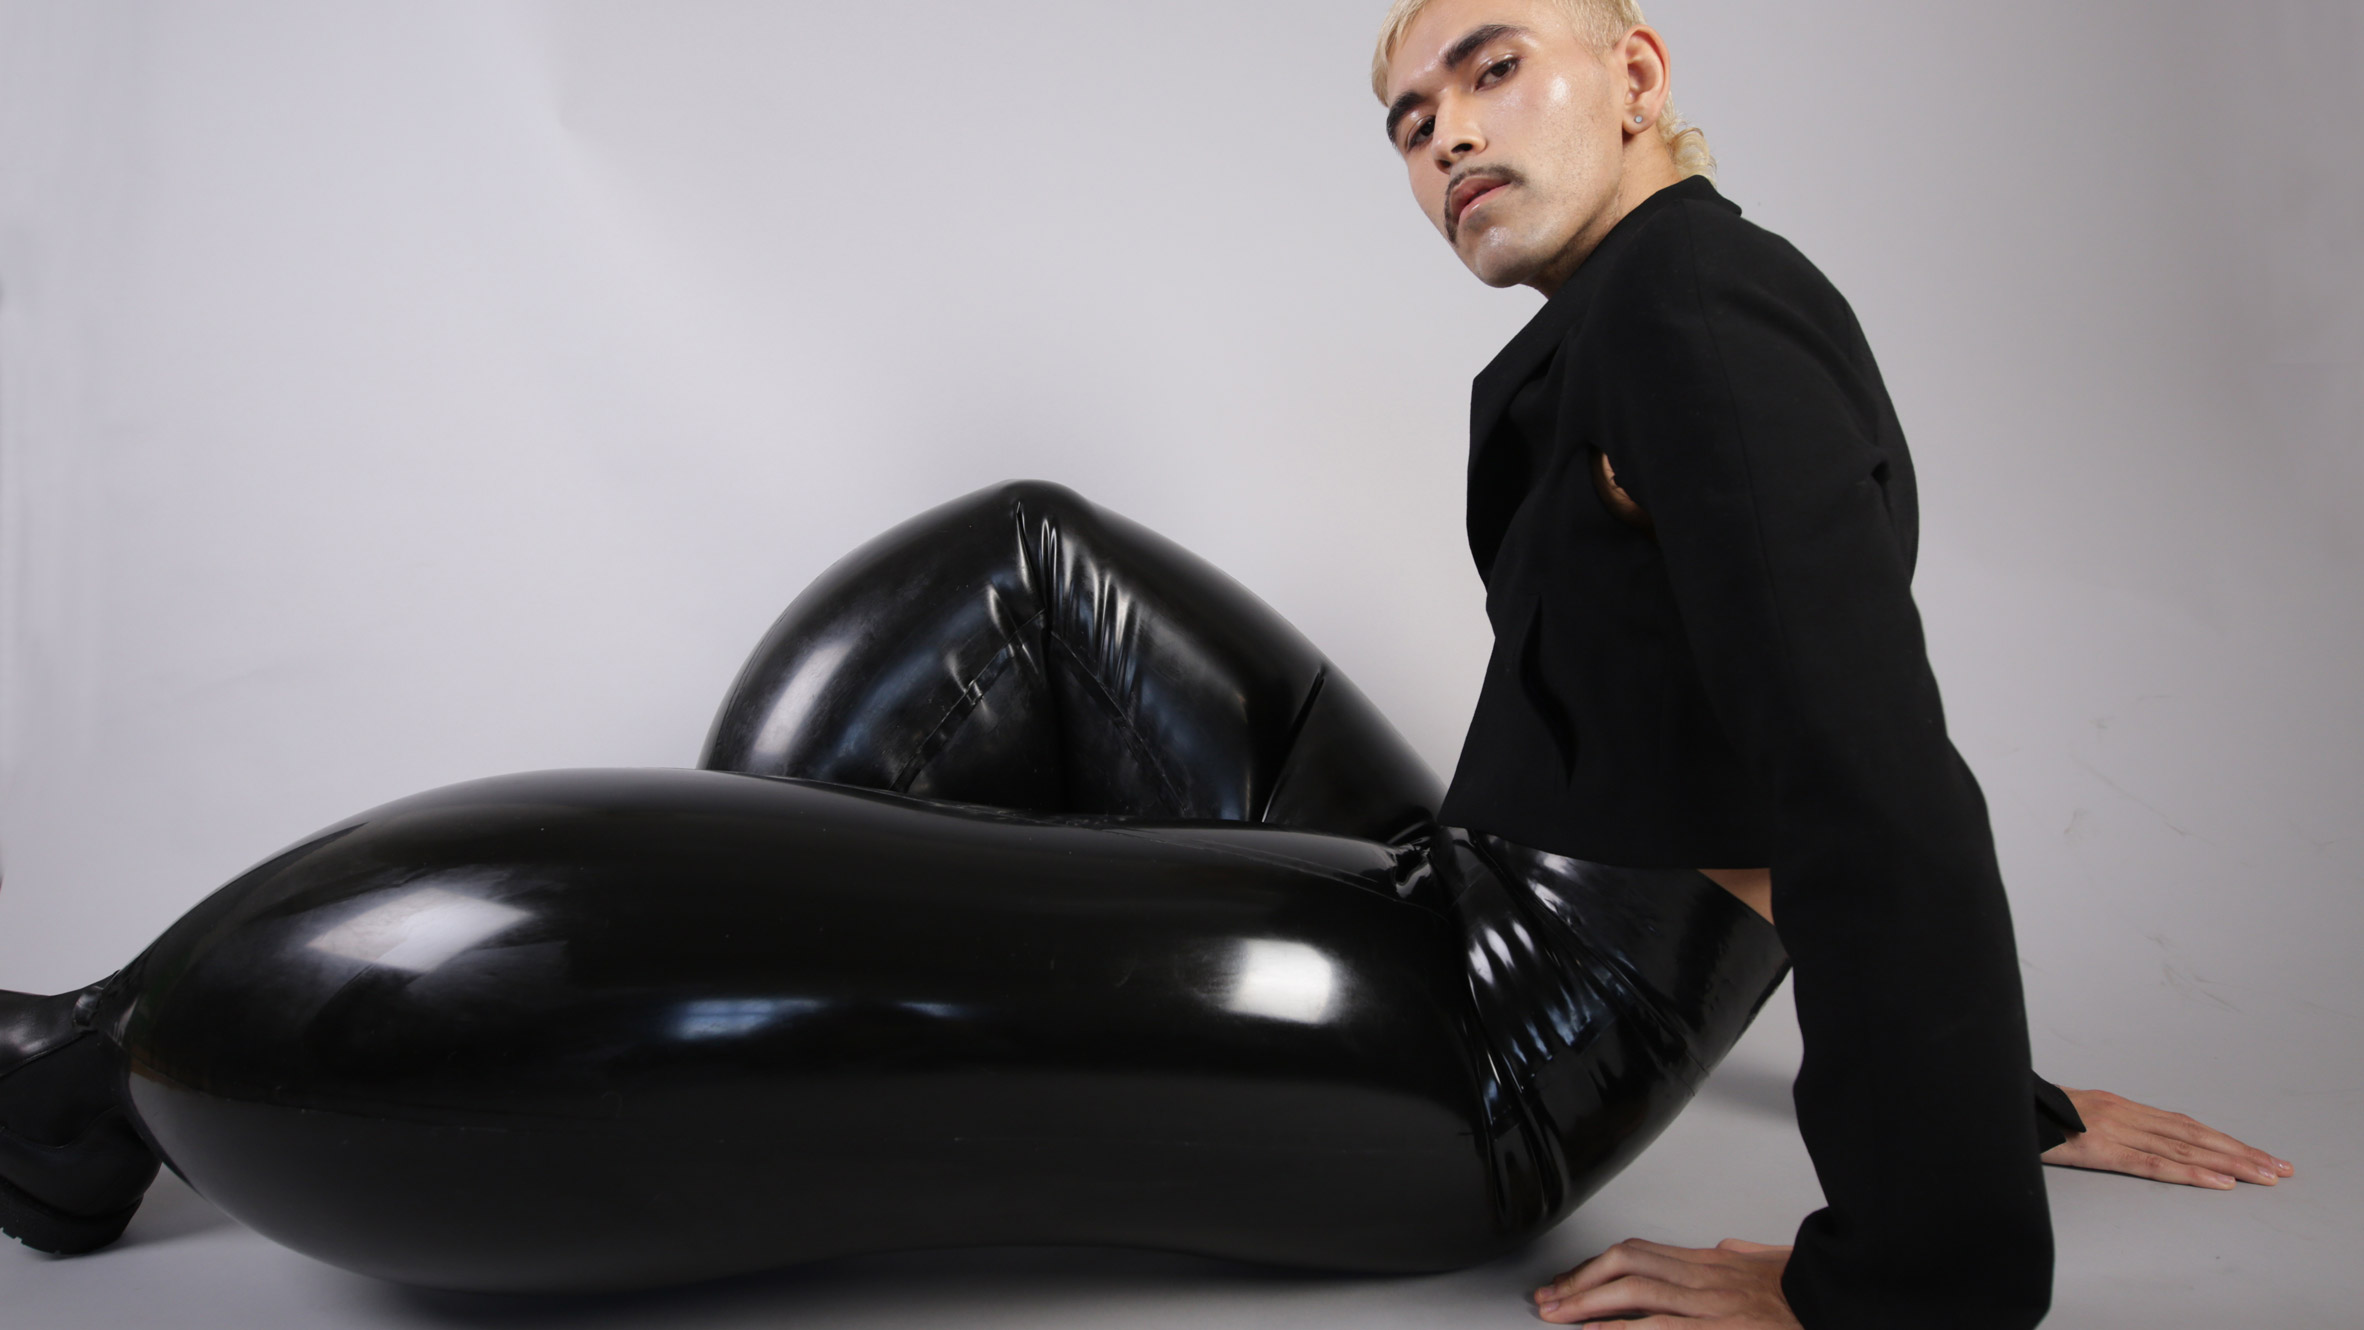 Harikrishnan's blow-up latex pants on sale with do not